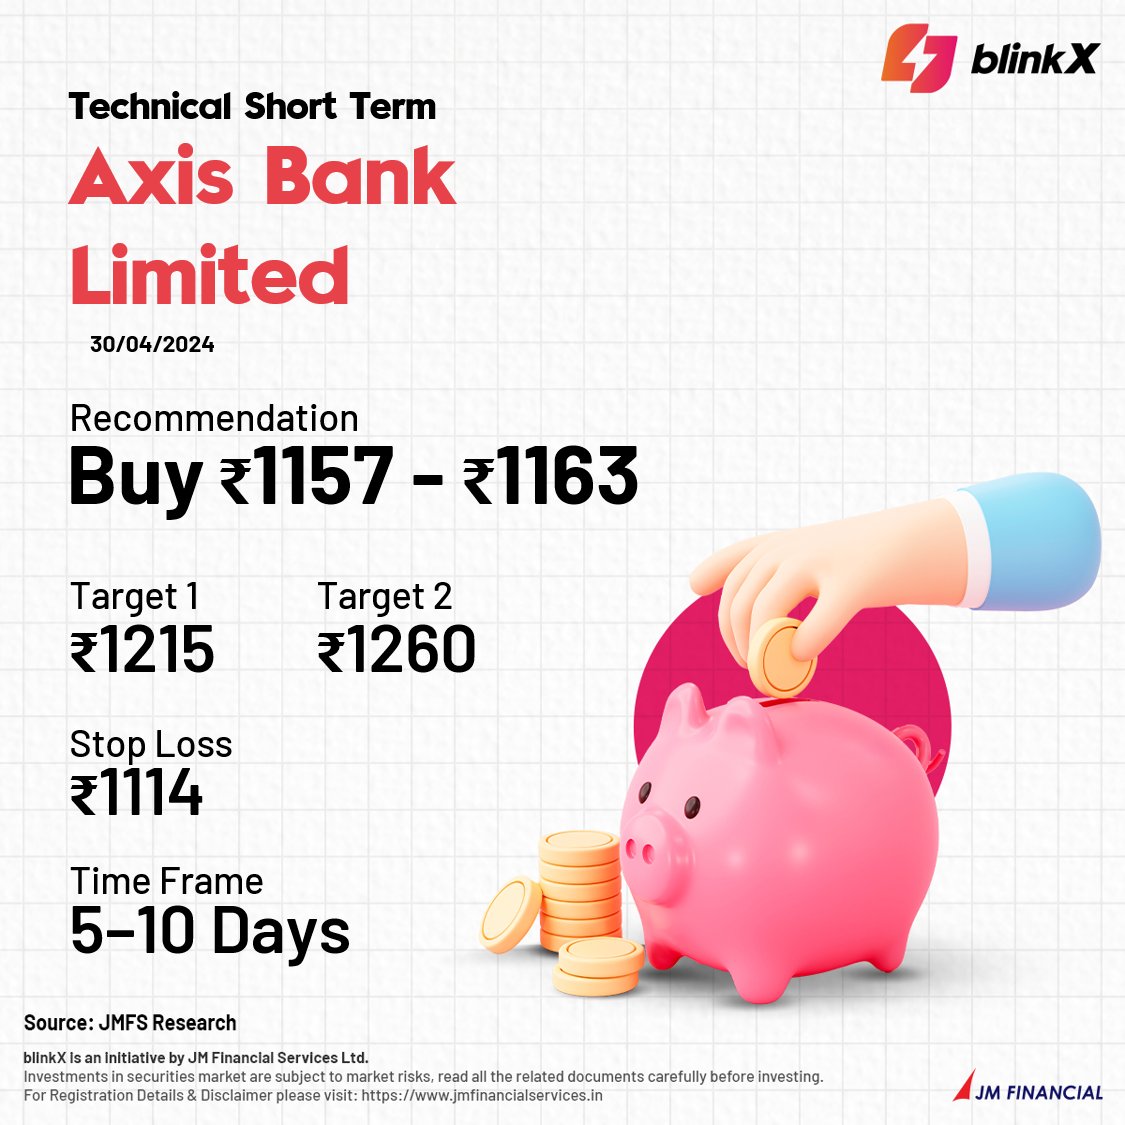 Technical Short Term

BUY – Axis Bank Ltd.

Get the app now: 
bit.ly/4cvU8YK

#AxisBank #AXIS #Bank #banking #BankingAndFinance #nse #bse #nifty50 #trading #intradaytrading #stockmarketindia #markets #stockmarket #investor #investments #finance #research